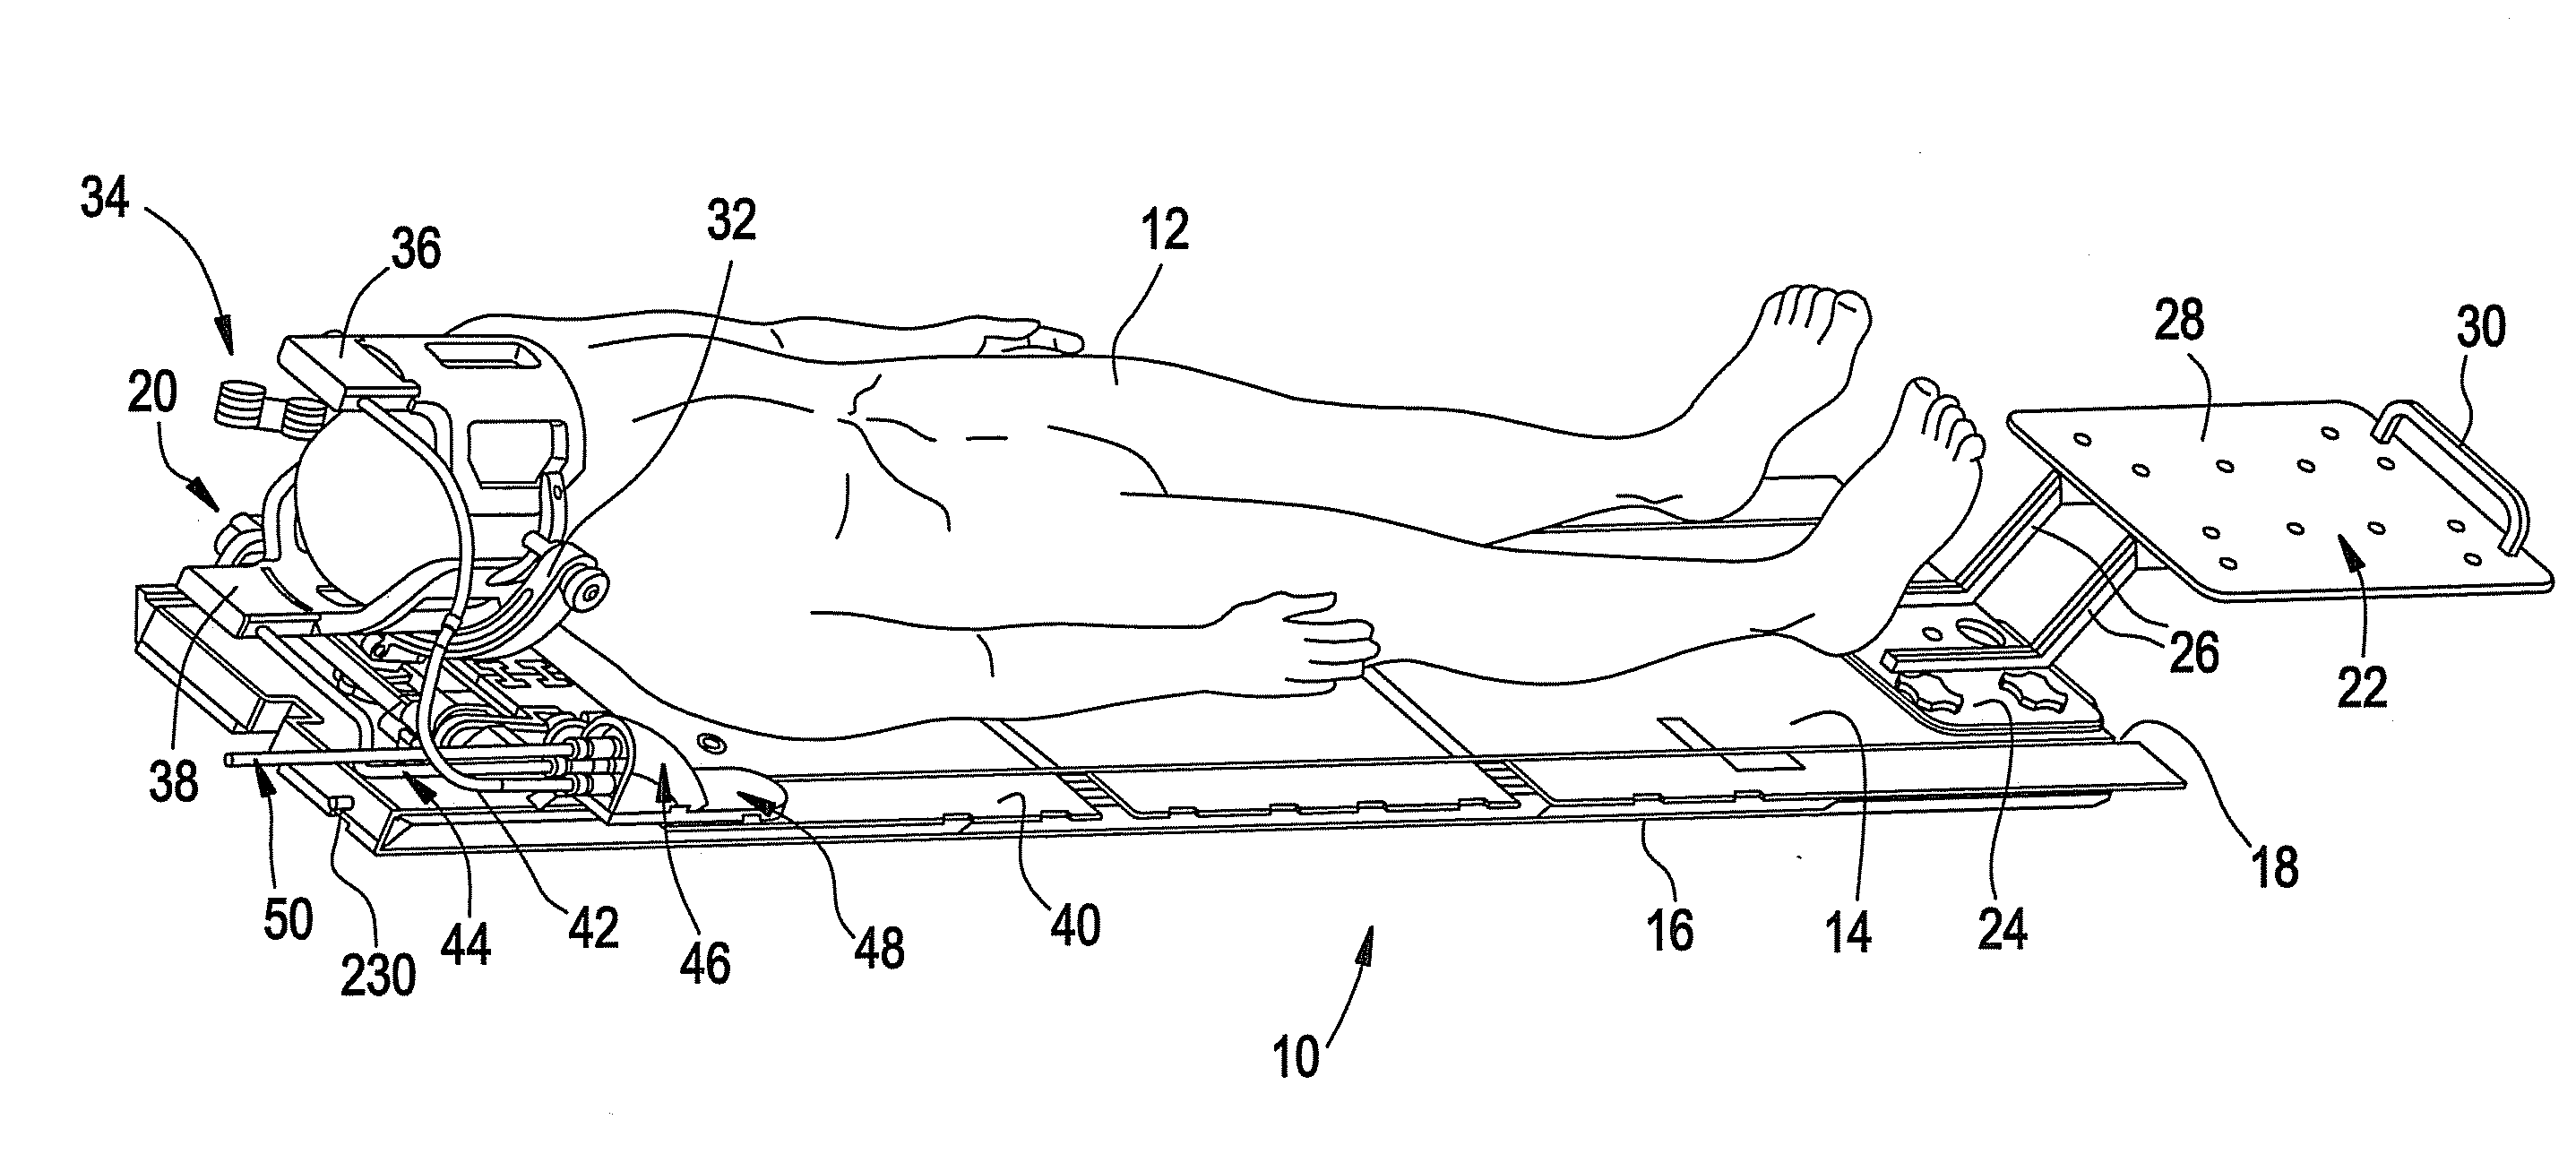 Patient table system and apparatus